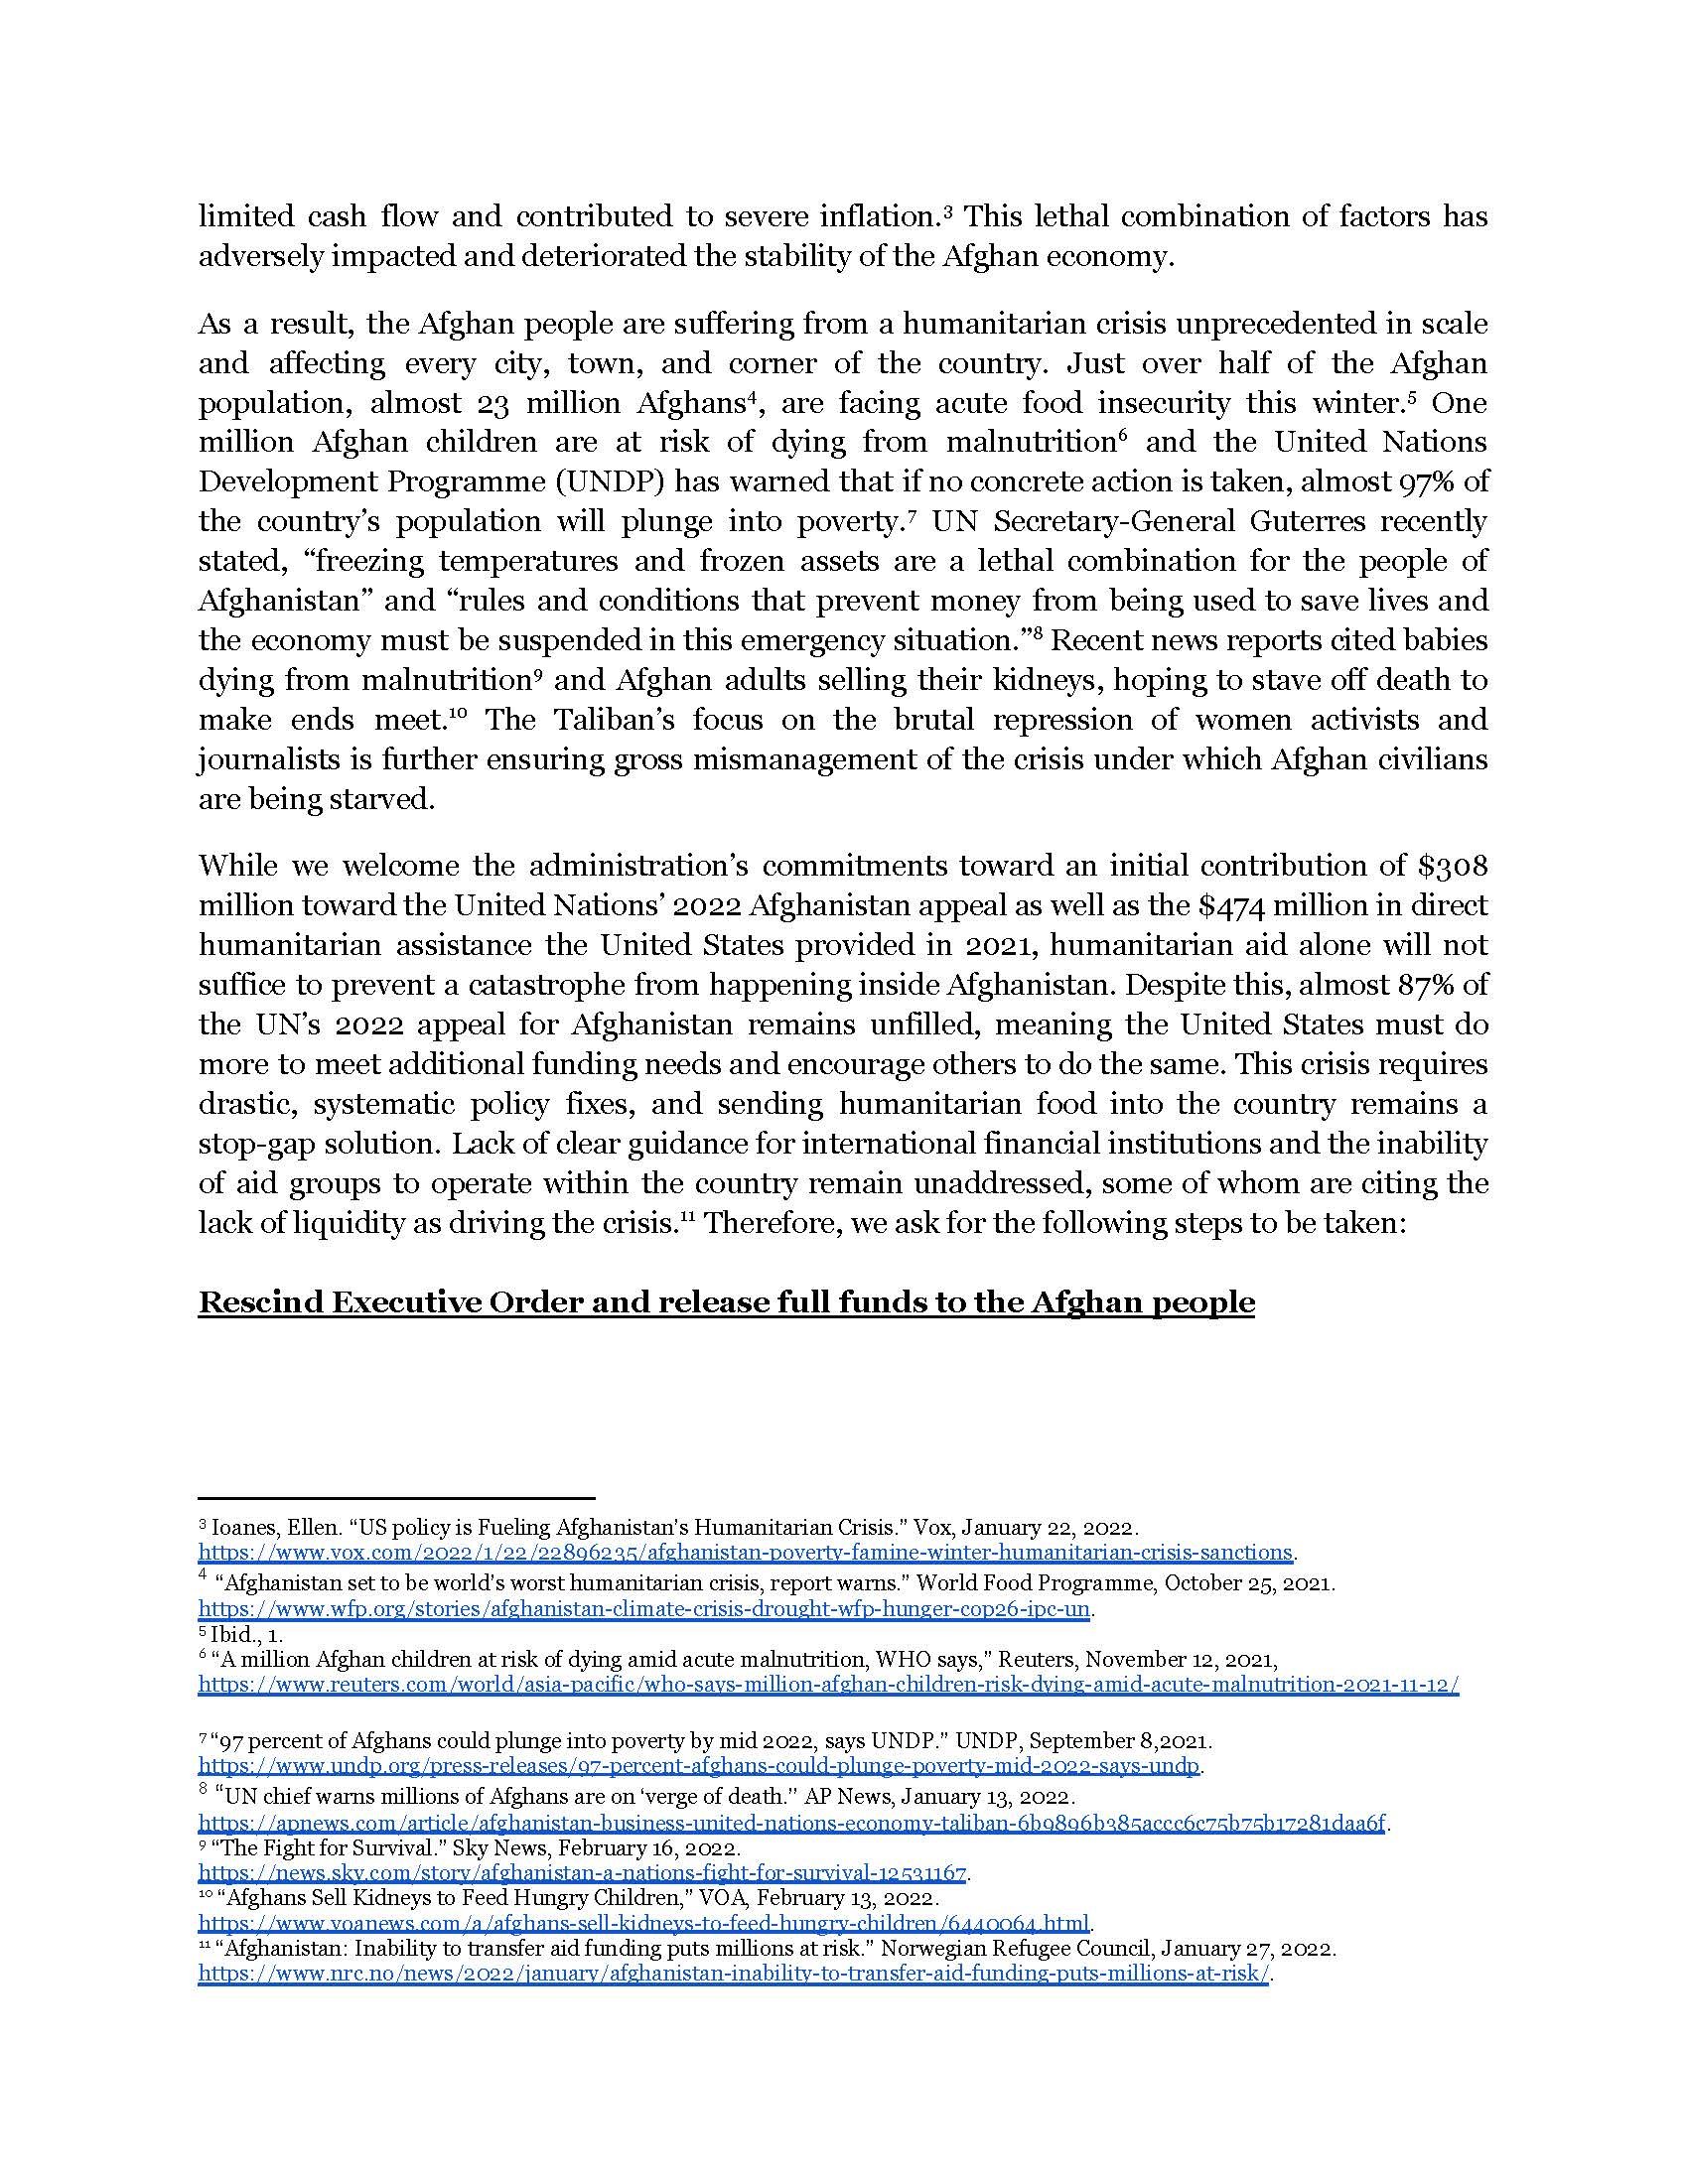 Sign-On Letter_ On preventing famine and Afghanistan's frozen funds -5_Page_2.jpg